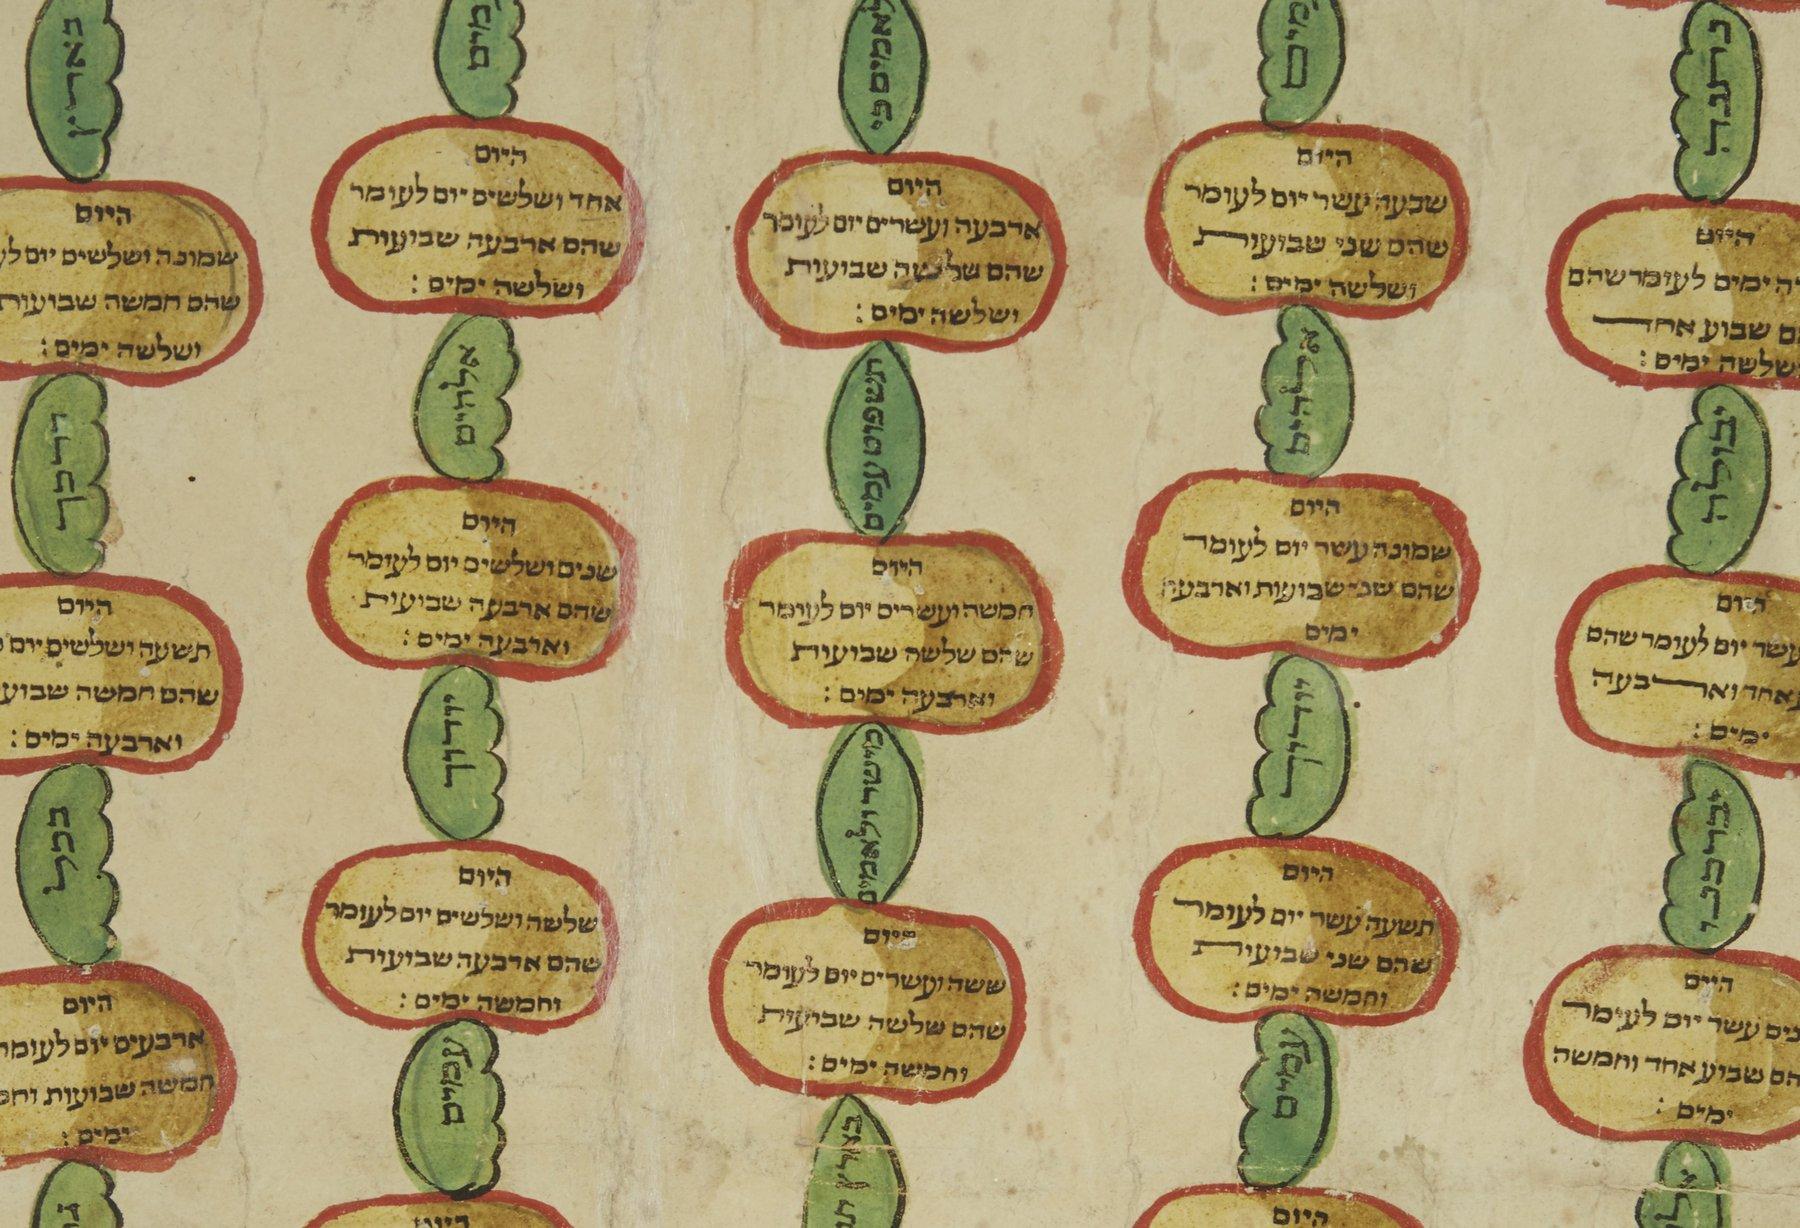 Italian Omer Calendar, Ink and gouache on paper, early 19th century. 
This exquisite work of art features a representation of the Temple Menorah (notice how it is lit), and encapsulated in every golden-colored oblong shape is the Hebrew verse for